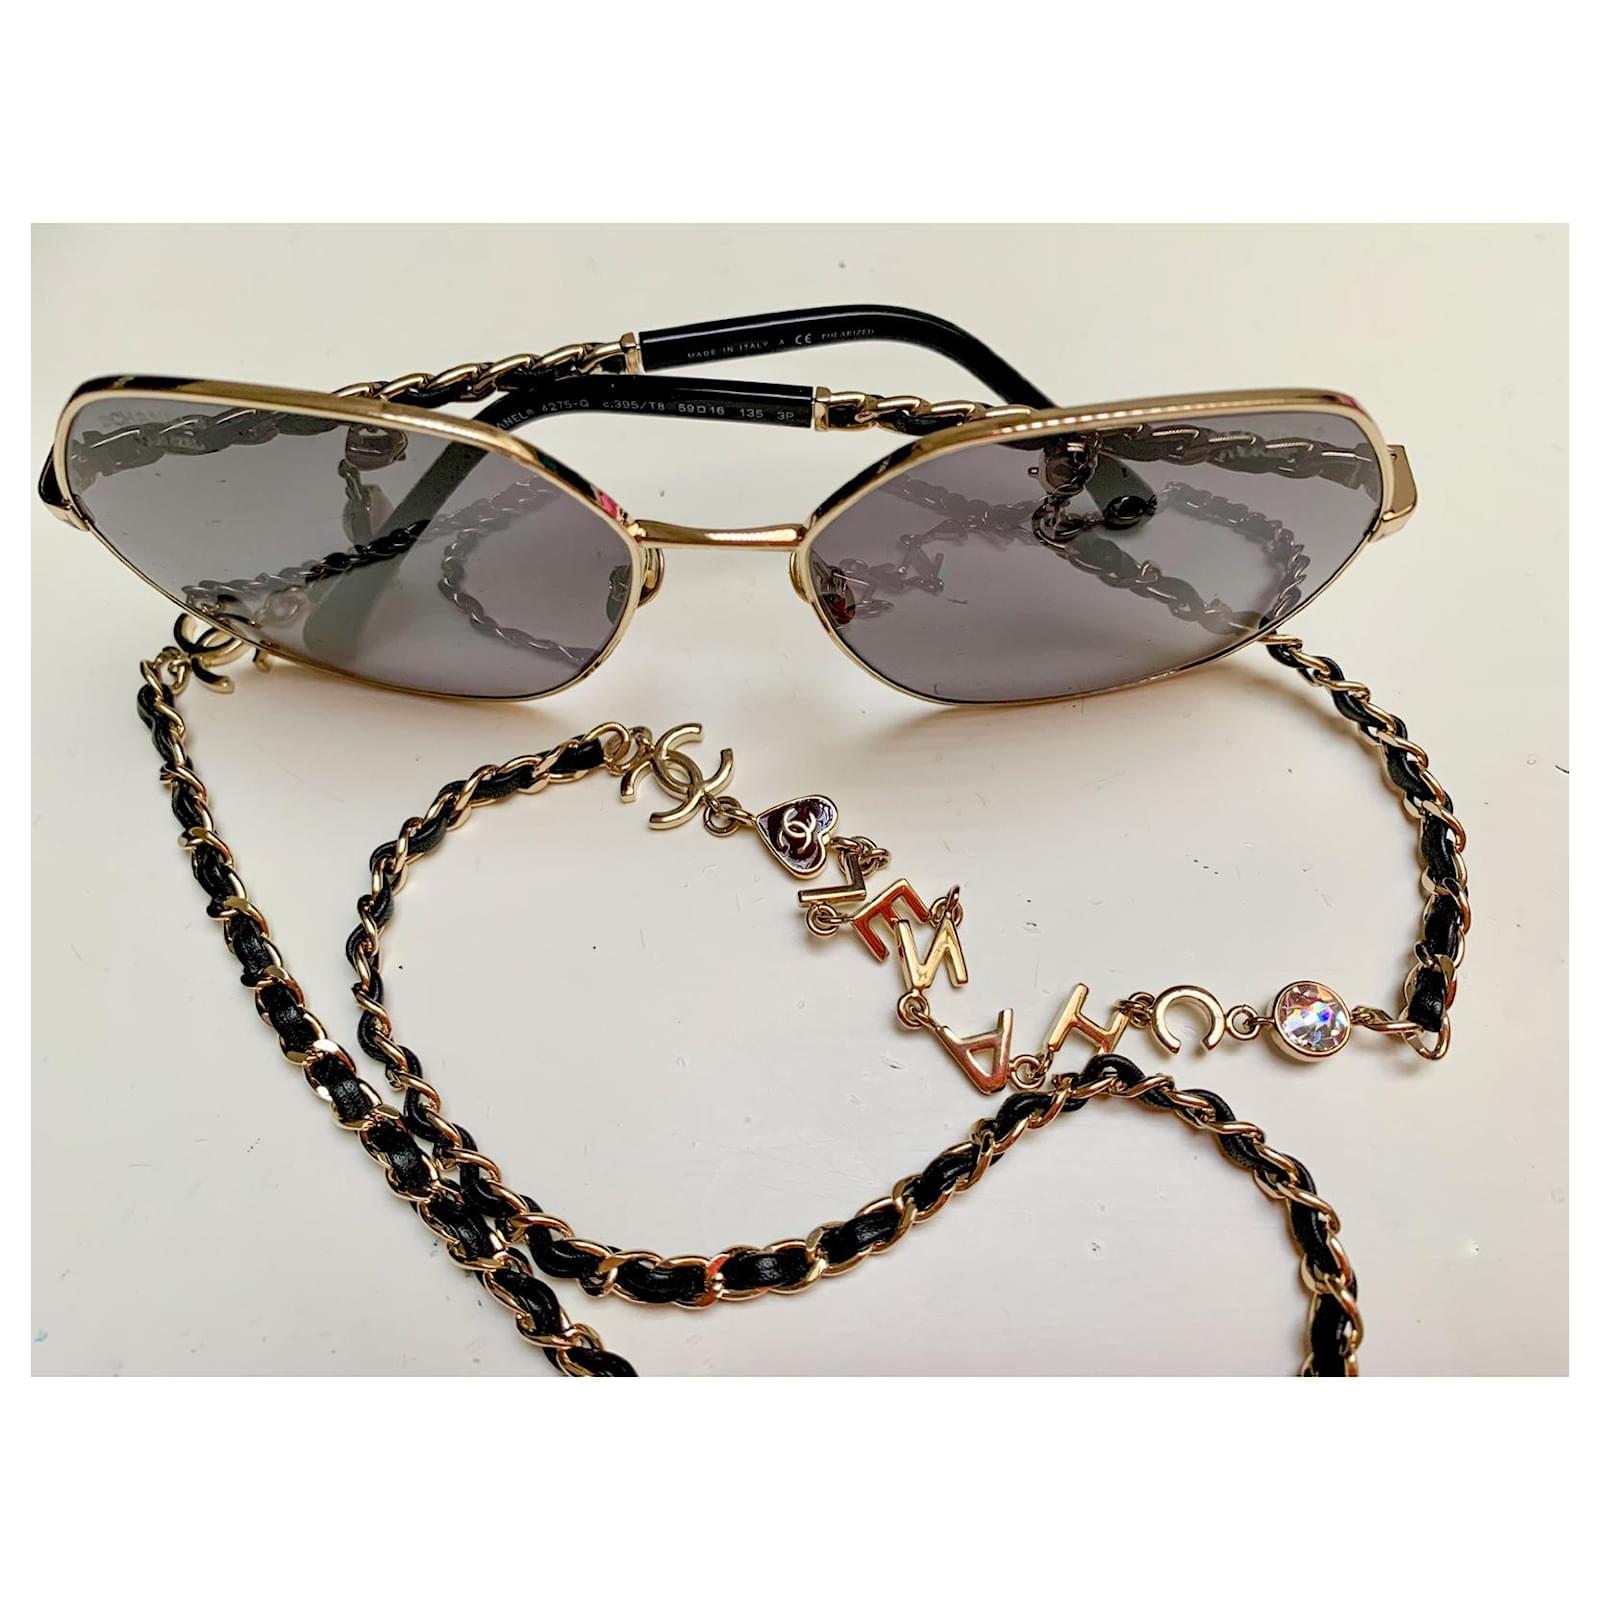 Sunglasses Chanel  Chain embellished black round sunglasses  CH4245C395S6